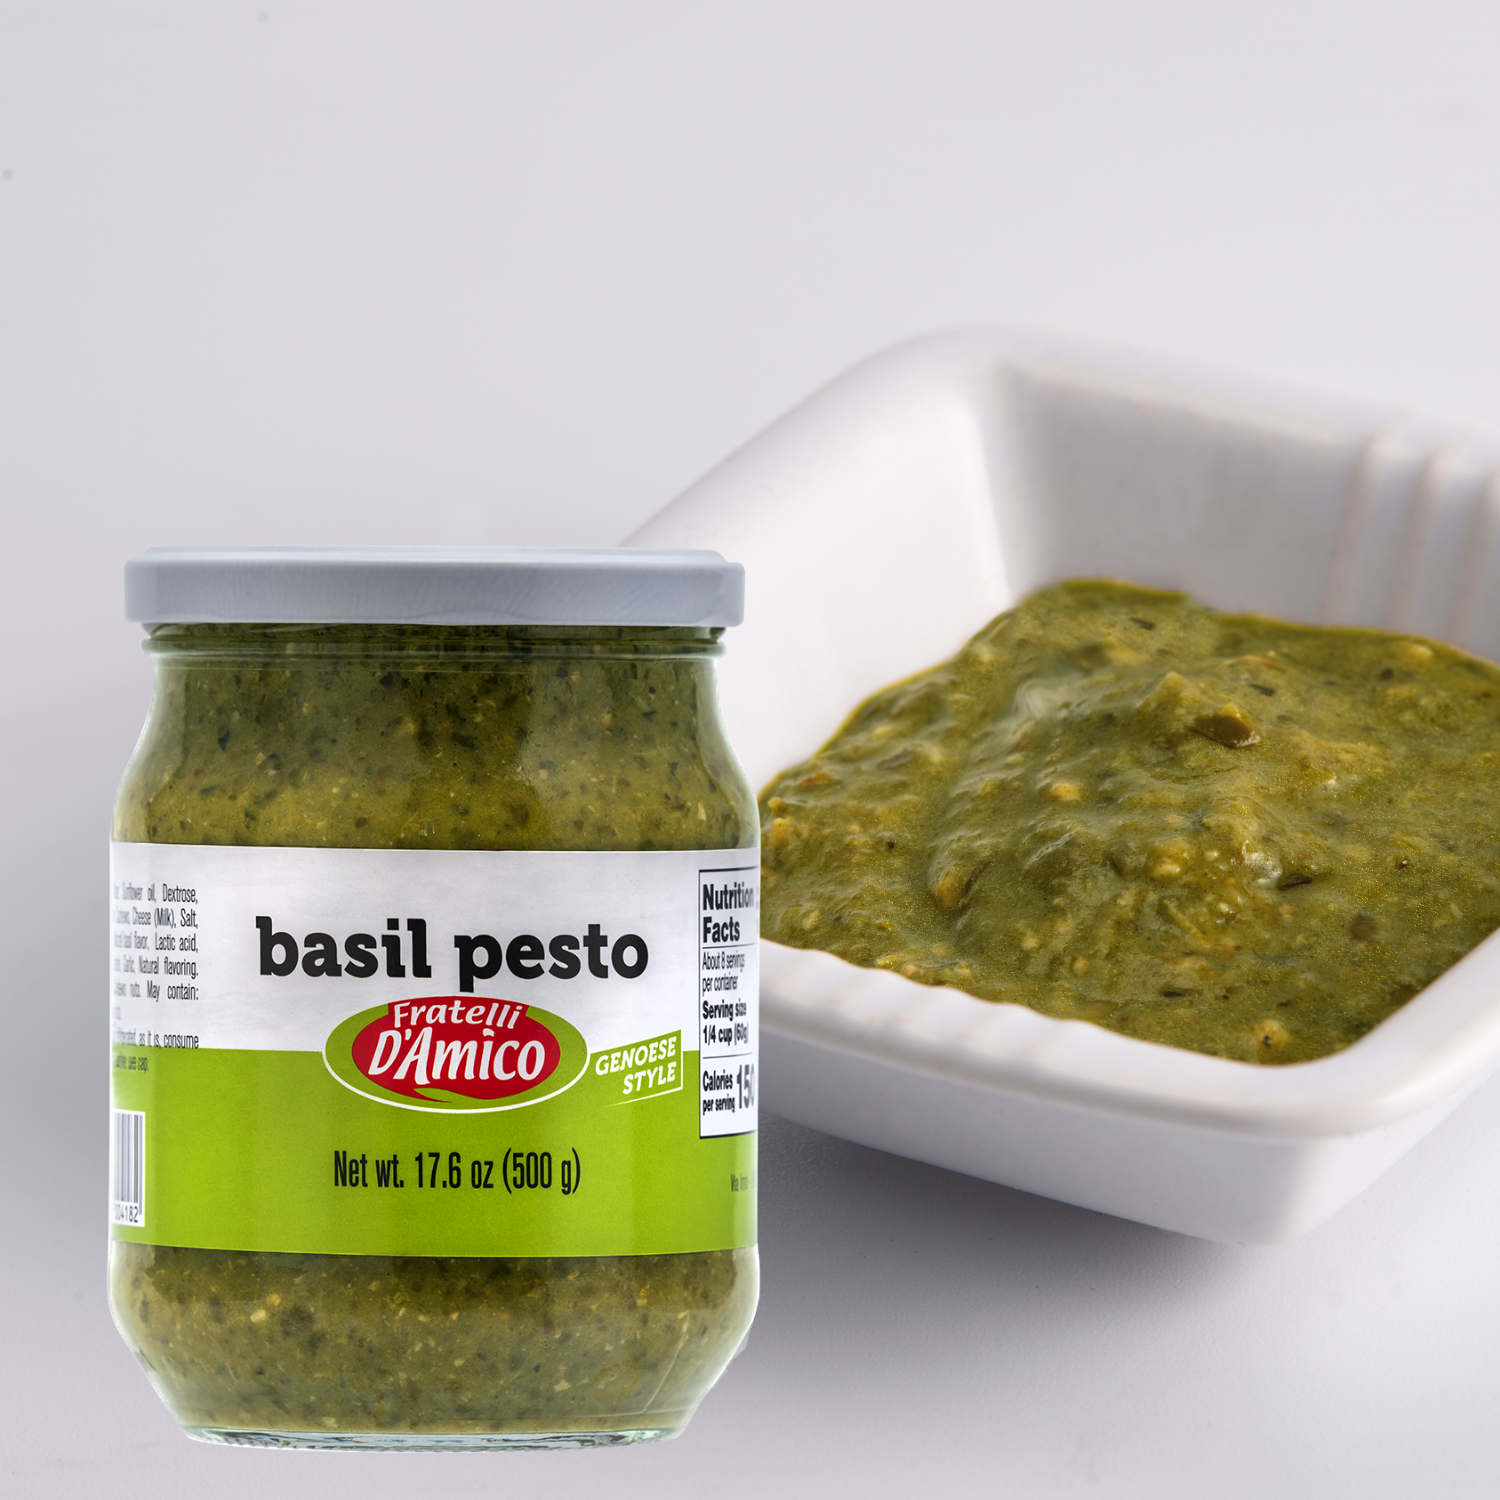 Basil Pesto, Pesto Genovese, Genoes Style, Pesto Pasta, Family Size, Non-GMO, Net wt. 17.6oz, by Fratelli D'Amico. Product of Italy. Pesto alla genovese - typical Italian pesto - simply use in pasta or as a bruschetta topping. - use it on your salmon dishes With Irresistible Flavors, Made in Italy: Made with tasty Ital…